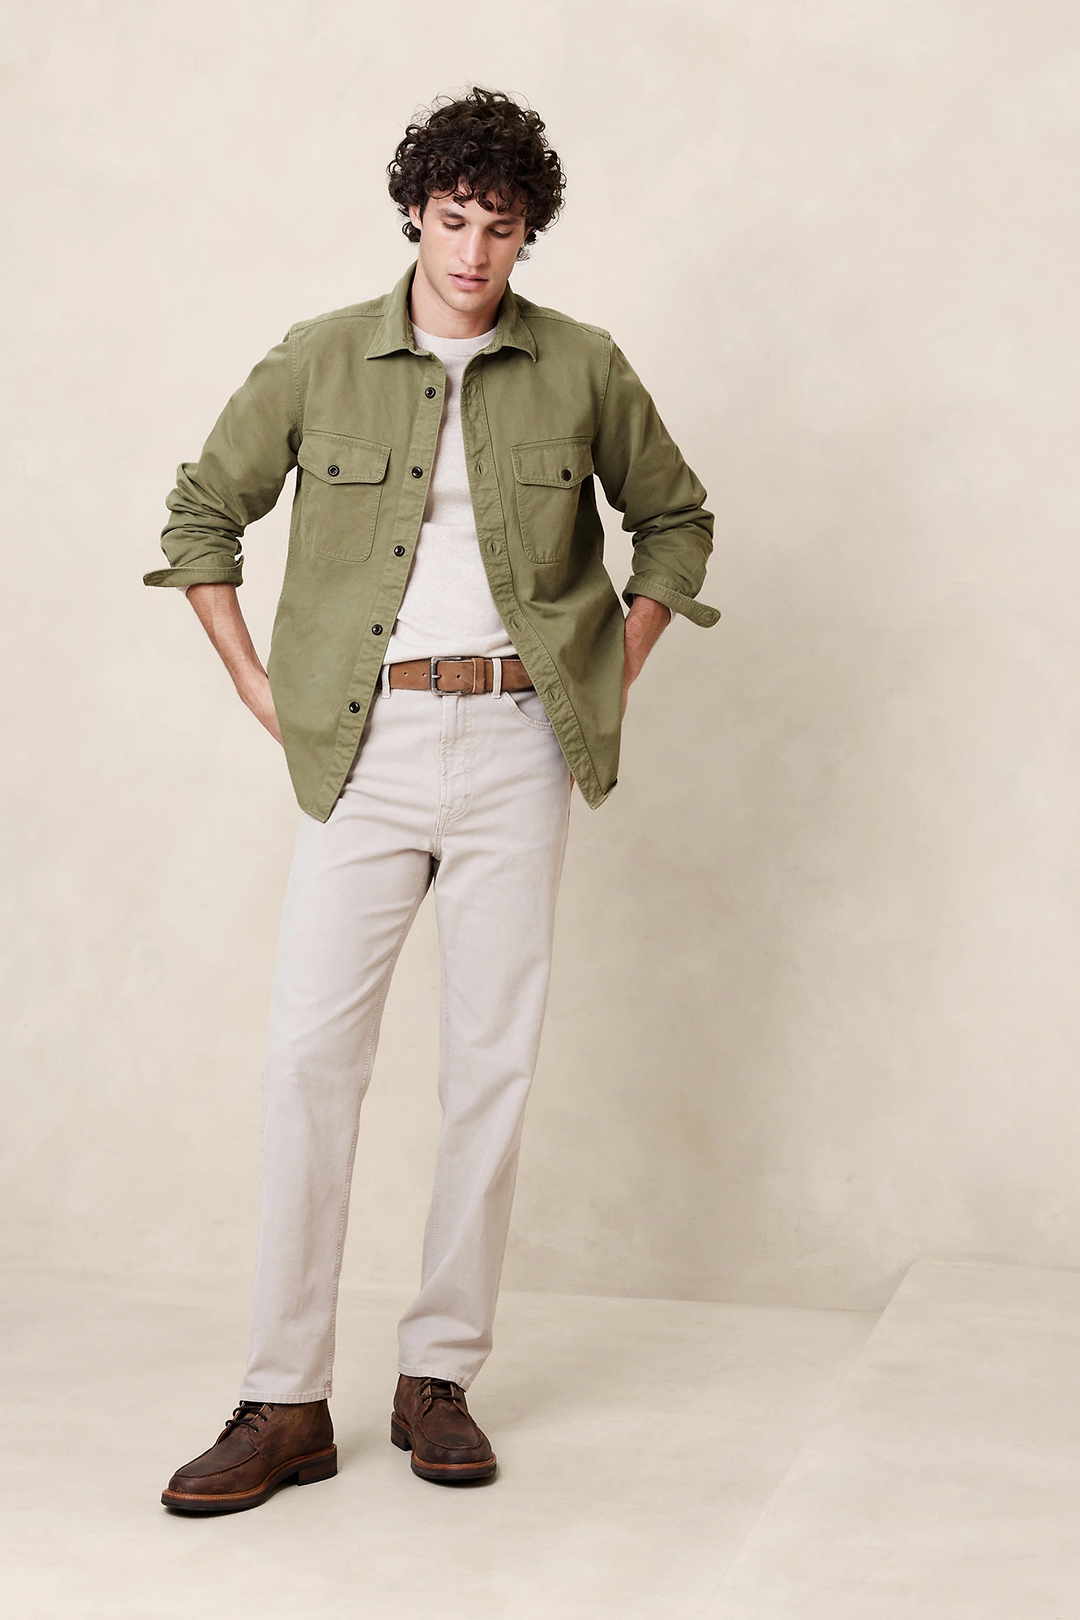 Green overshirt, beige t-shirt, cream jeans, and casual boots outfit